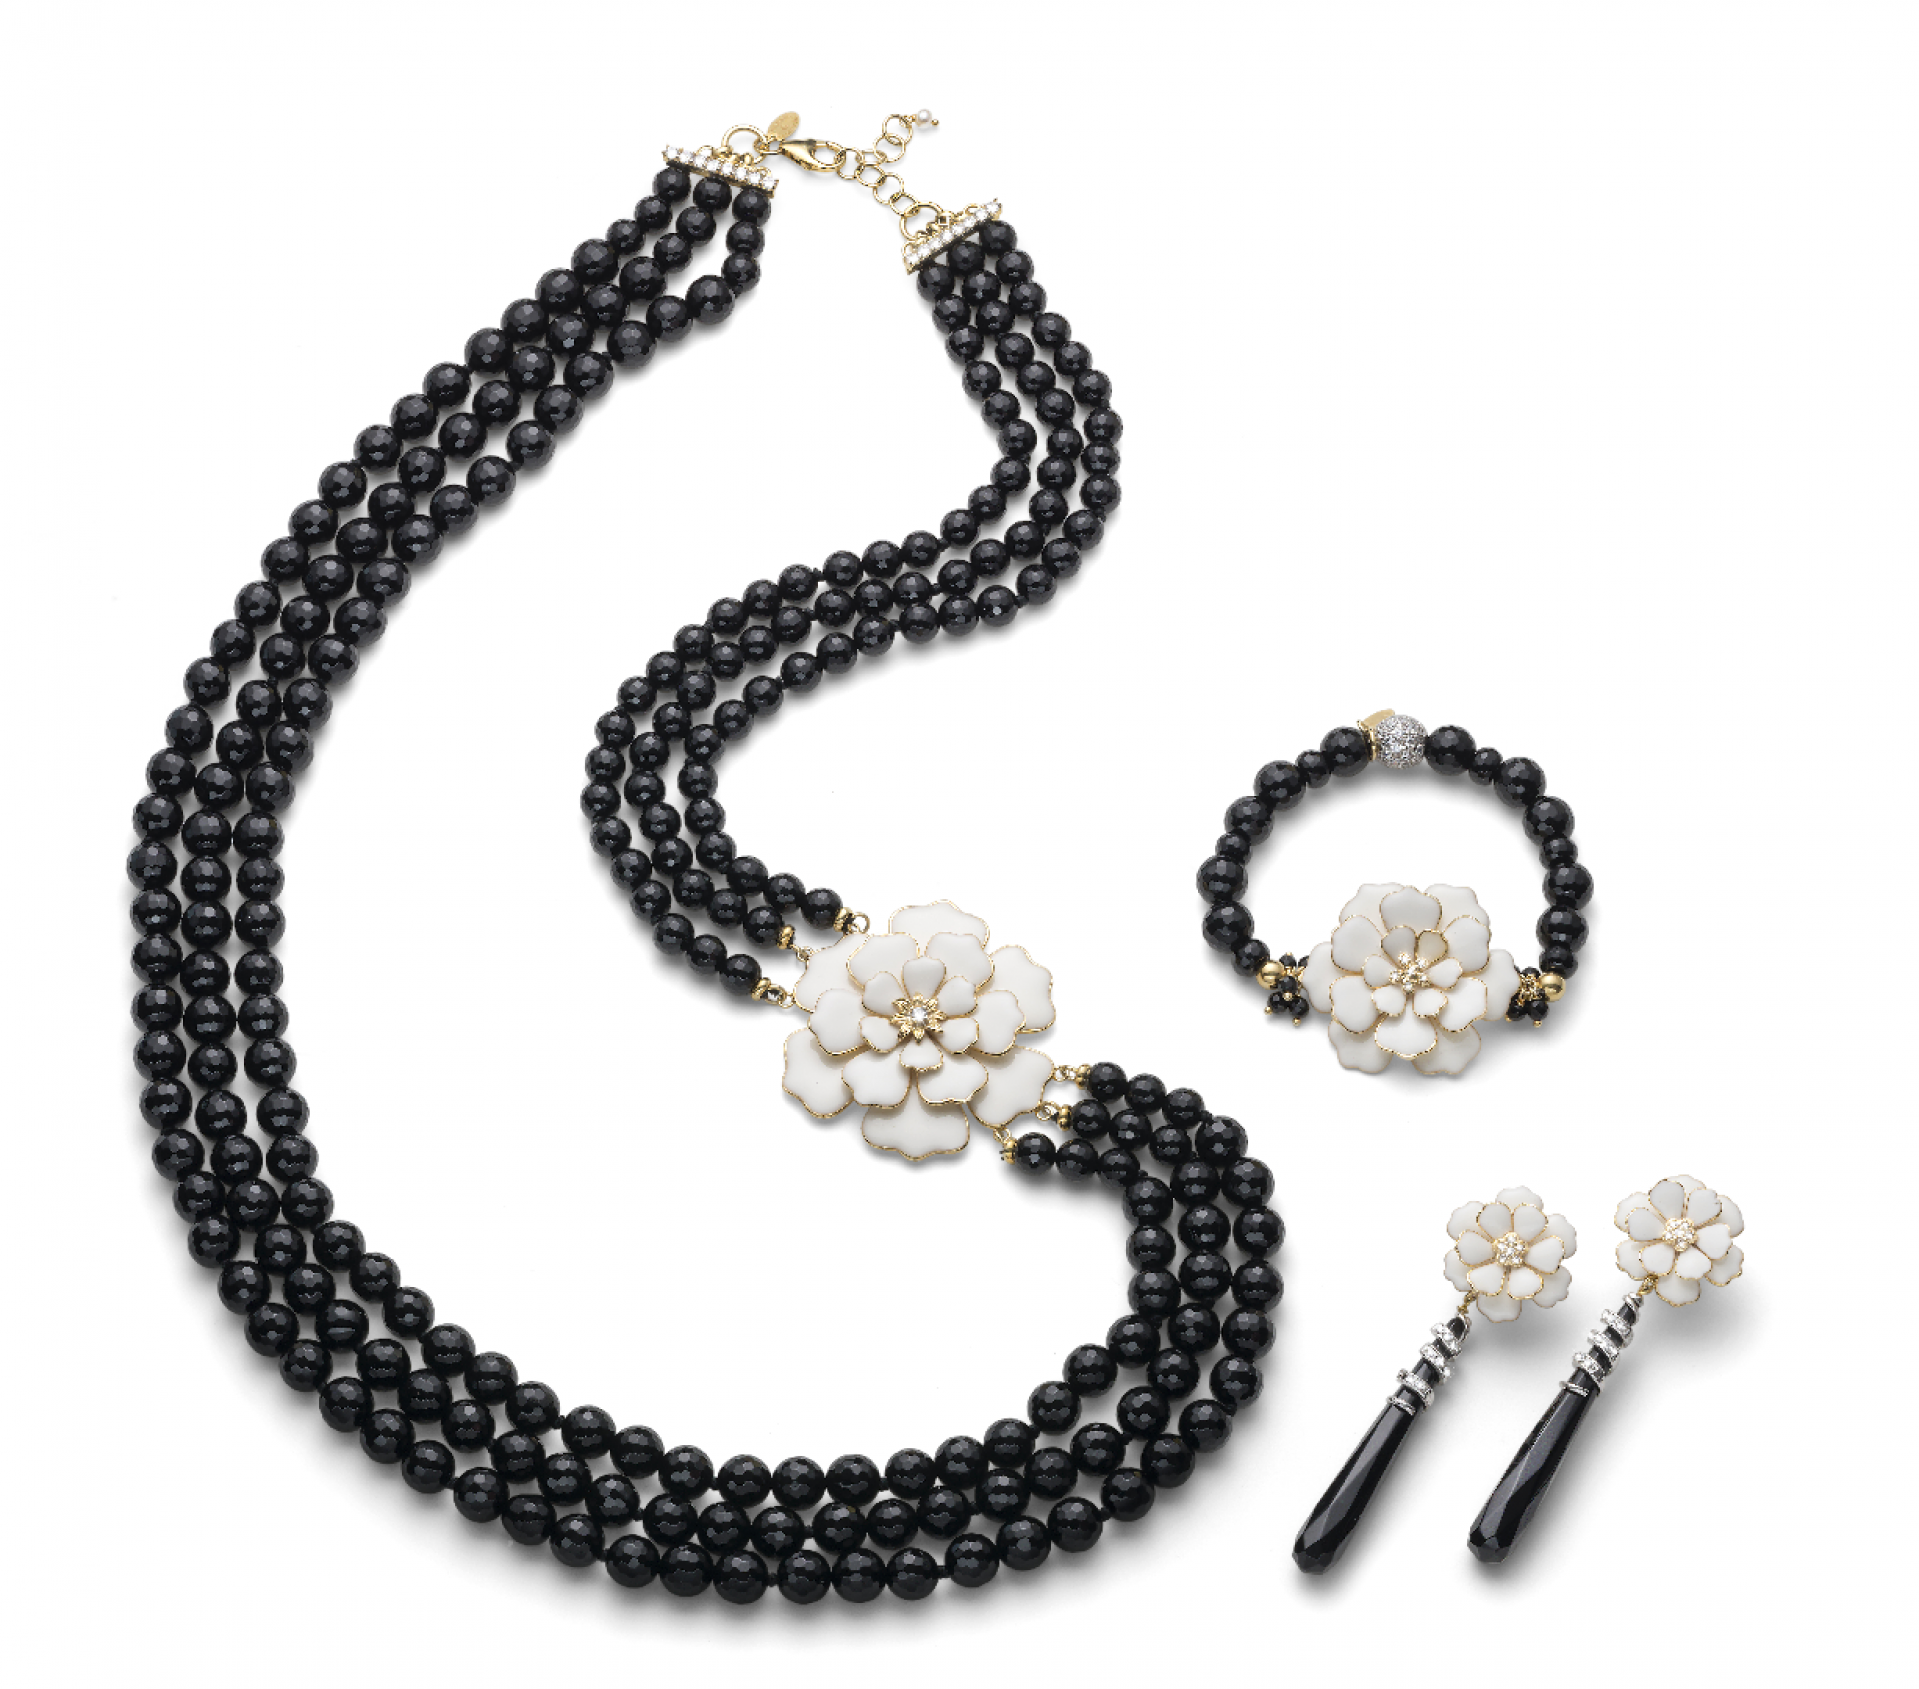 black necklace, earrings and rings with white pearls, white flowers, precious stones and golden details